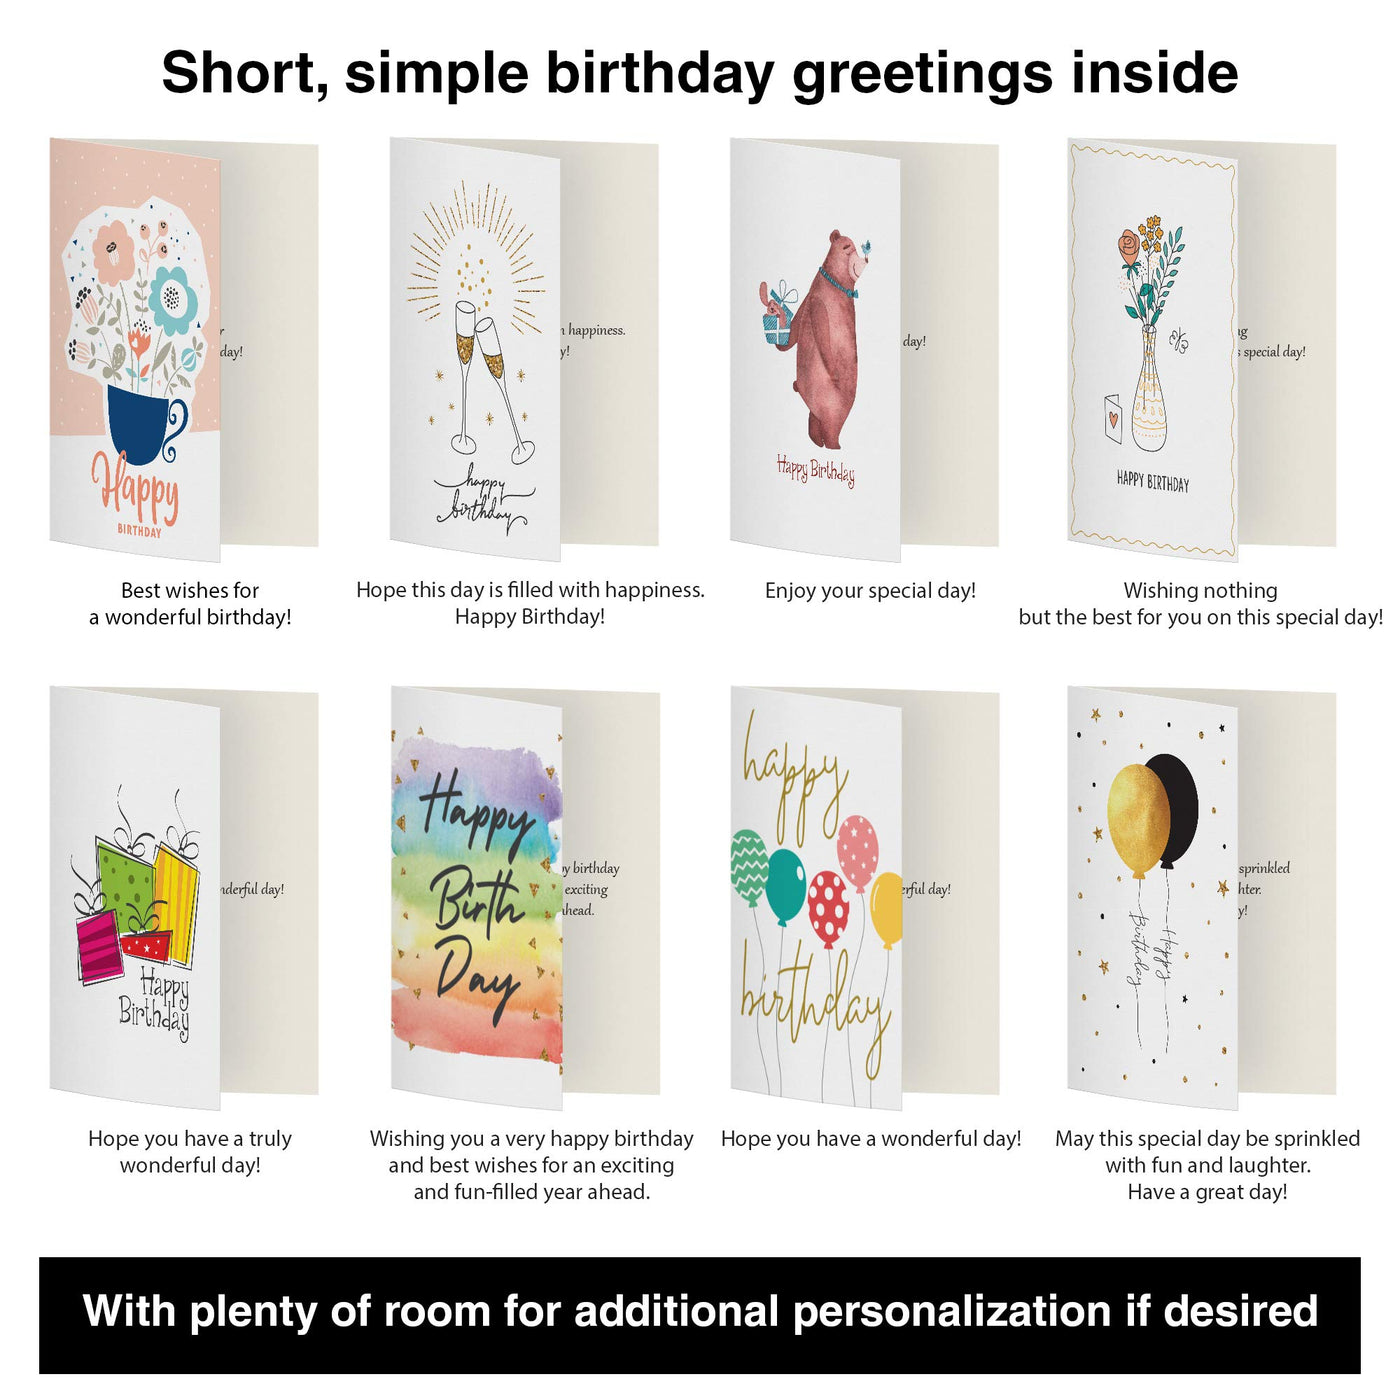 Dessie 100 Unique Birthday Cards Assortment with Greetings Inside